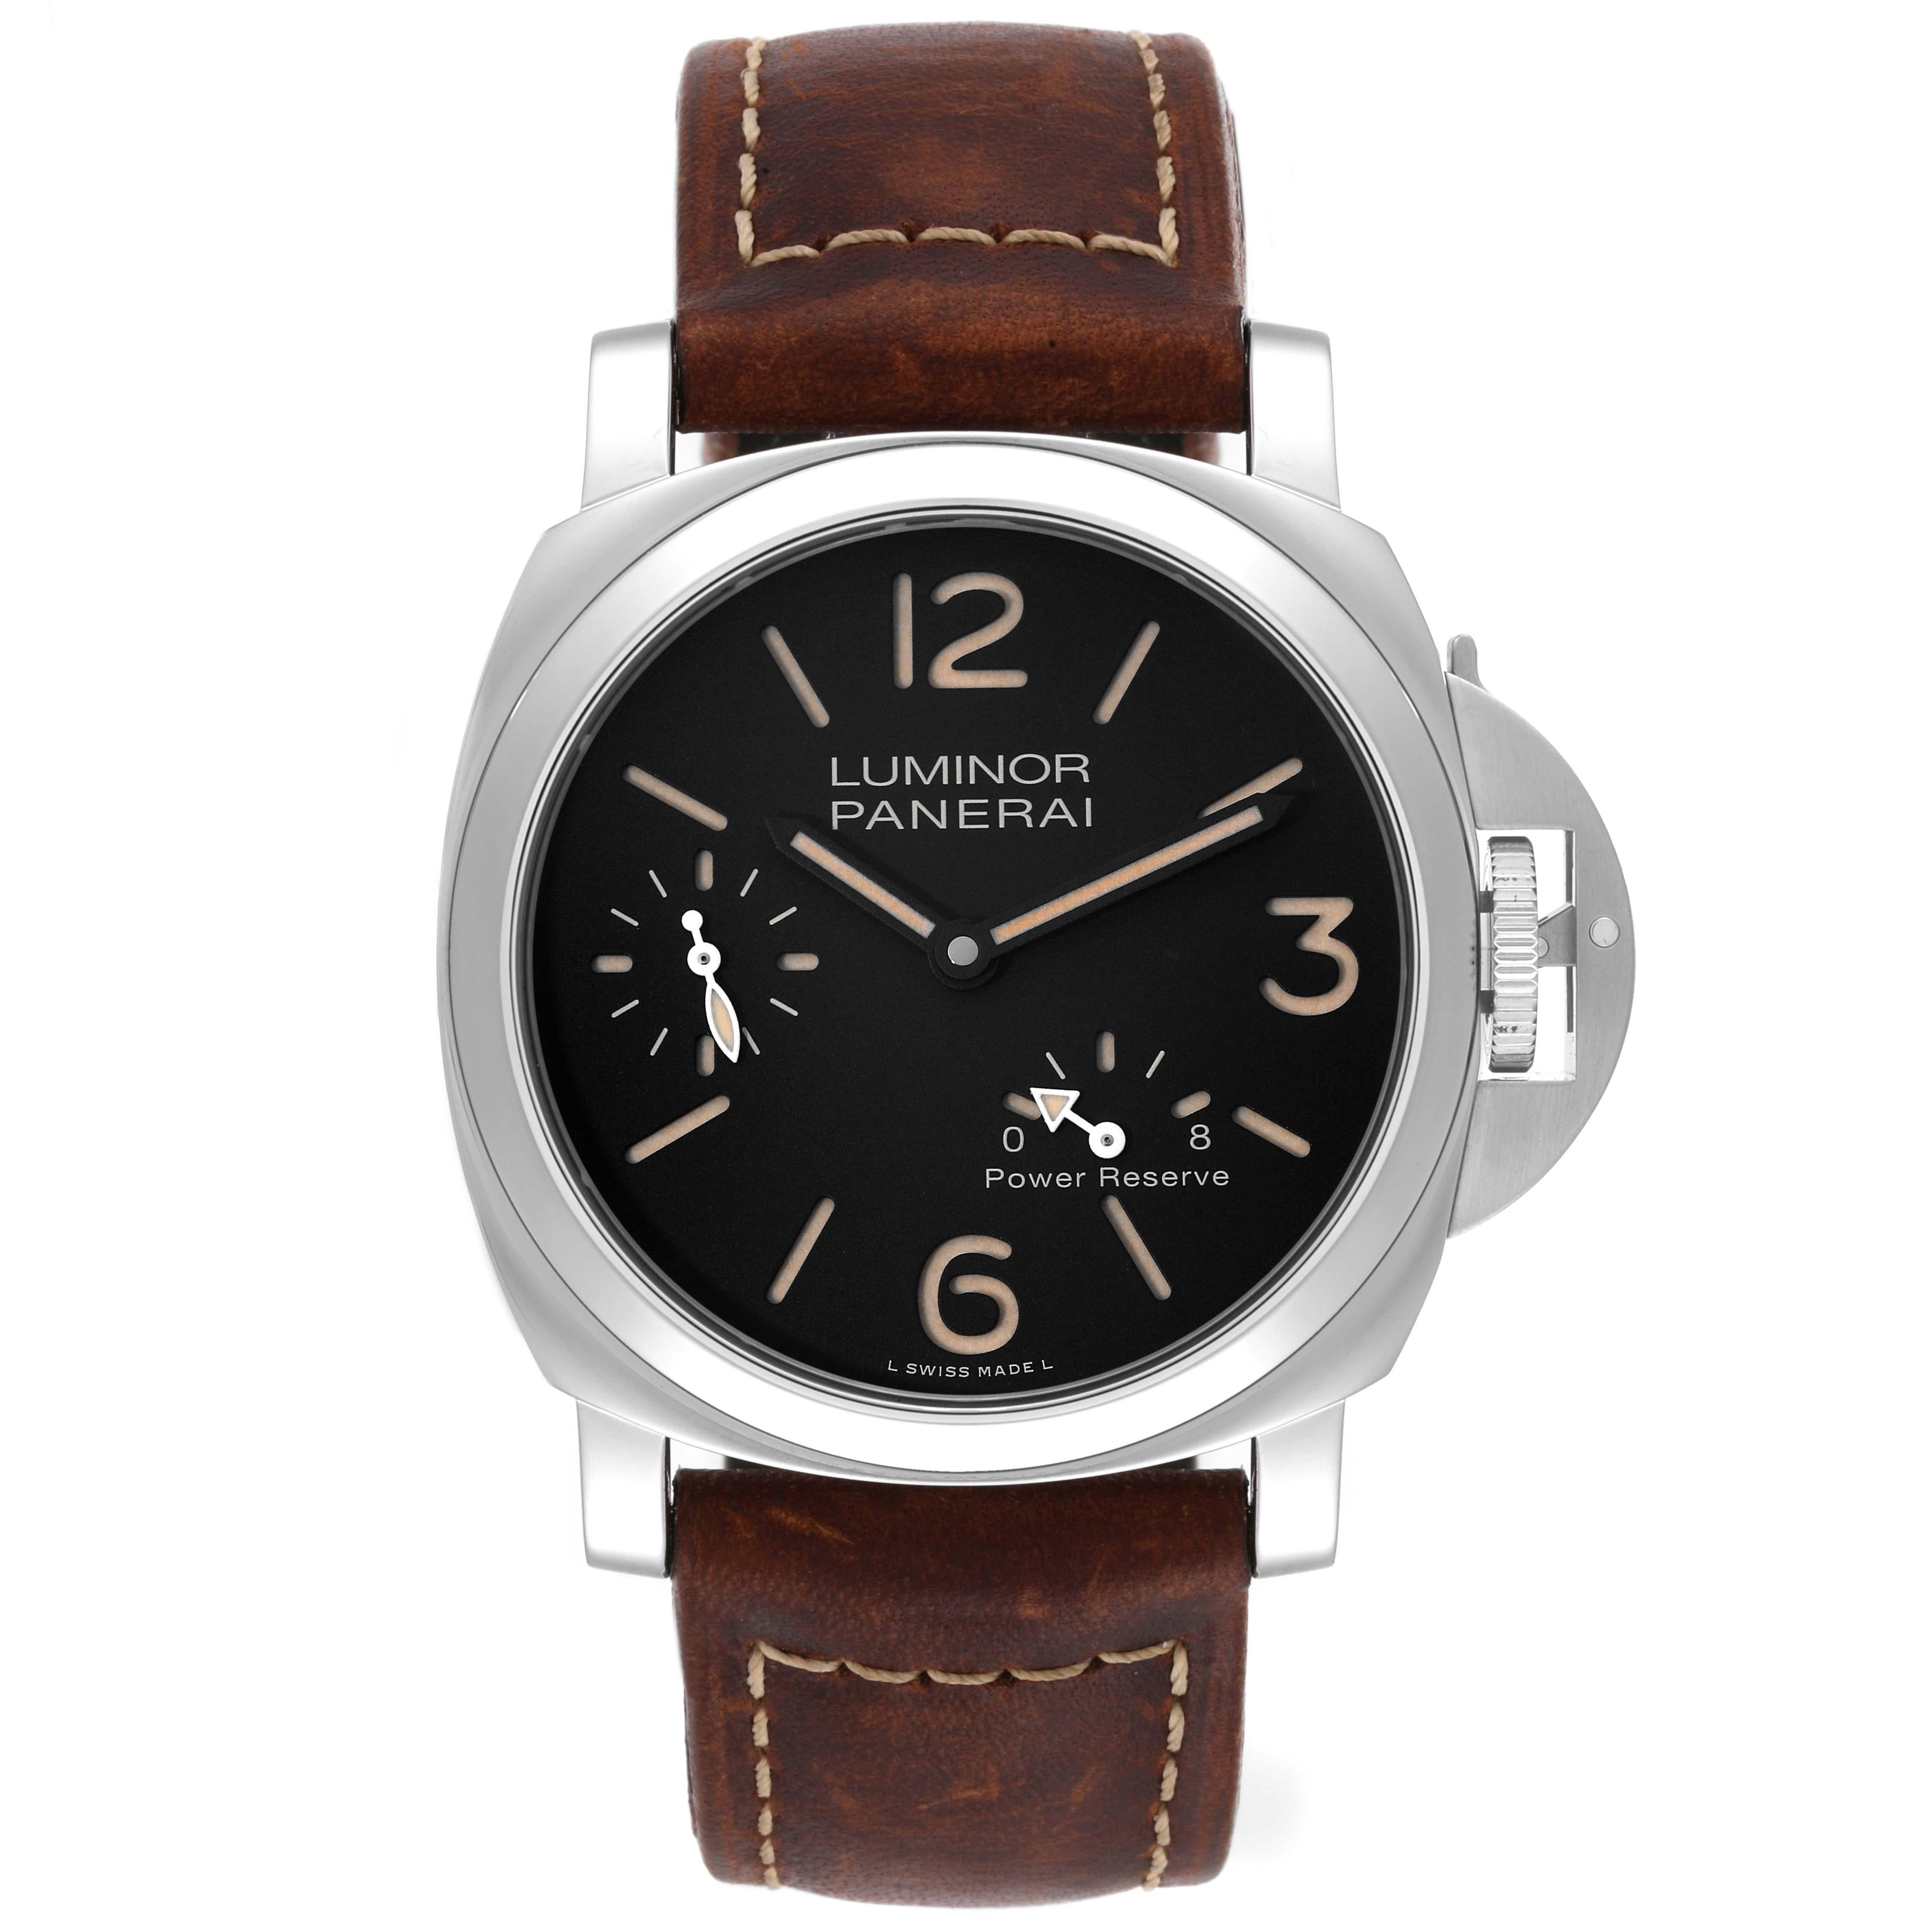 Panerai Luminor 8 Days 44mm Steel Mens Watch PAM00795. Automatic self-winding movement. Stainless steel cushion shaped case 44.0 mm in diameter. Panerai patented crown protector. Stainless steel sloped bezel. Scratch resistant sapphire crystal.